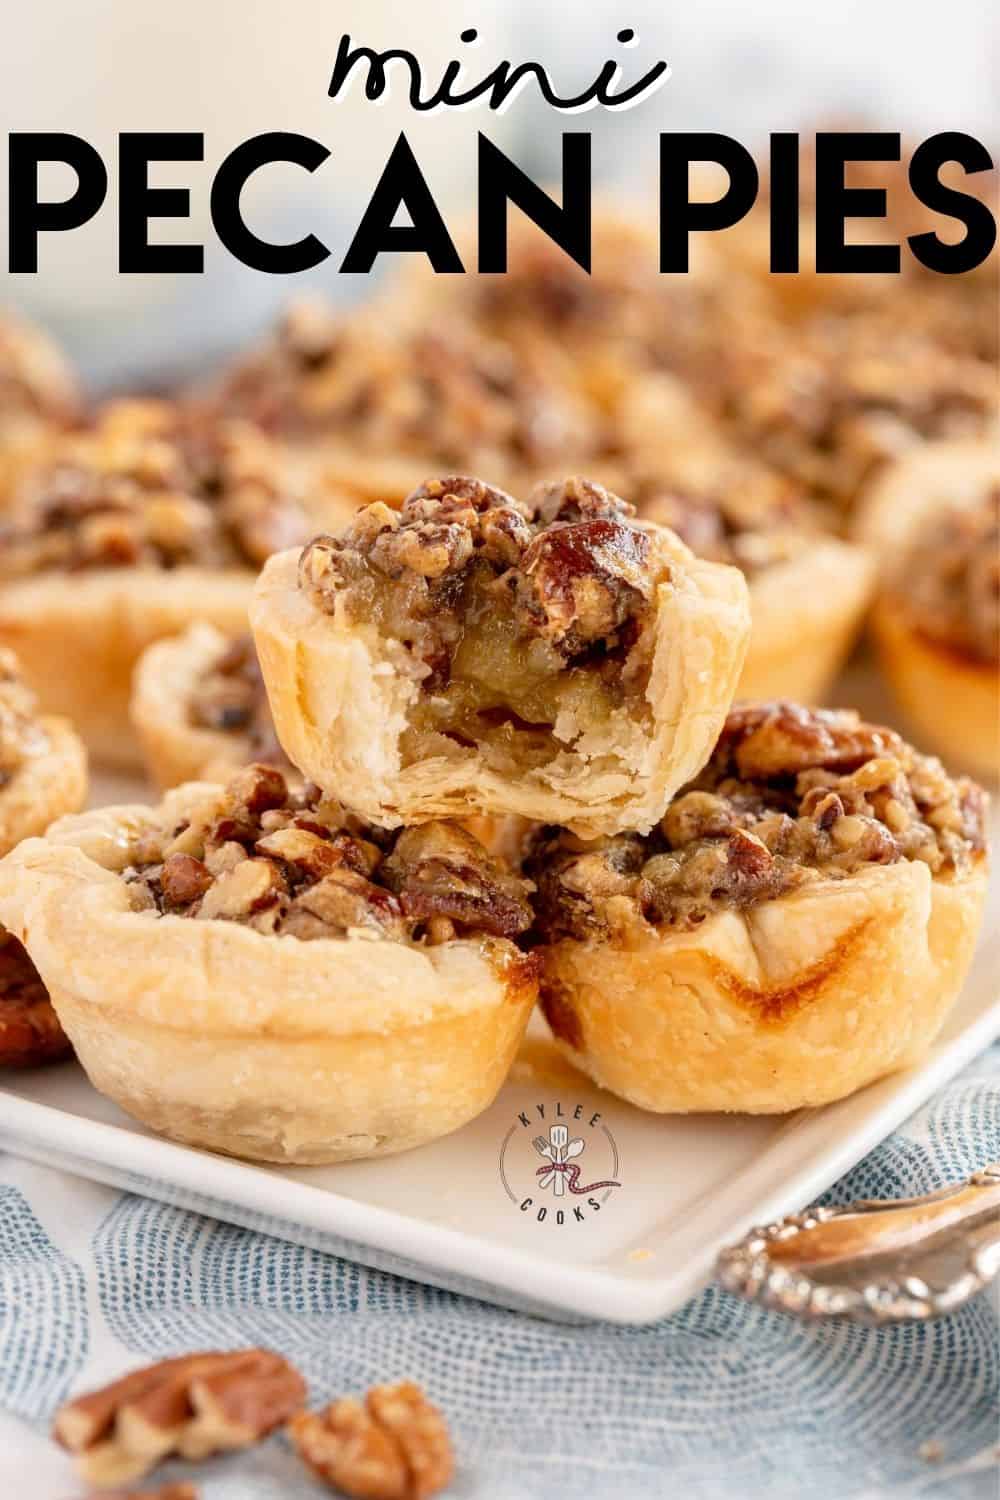 mini pecan pies with recipe title overlaid in text